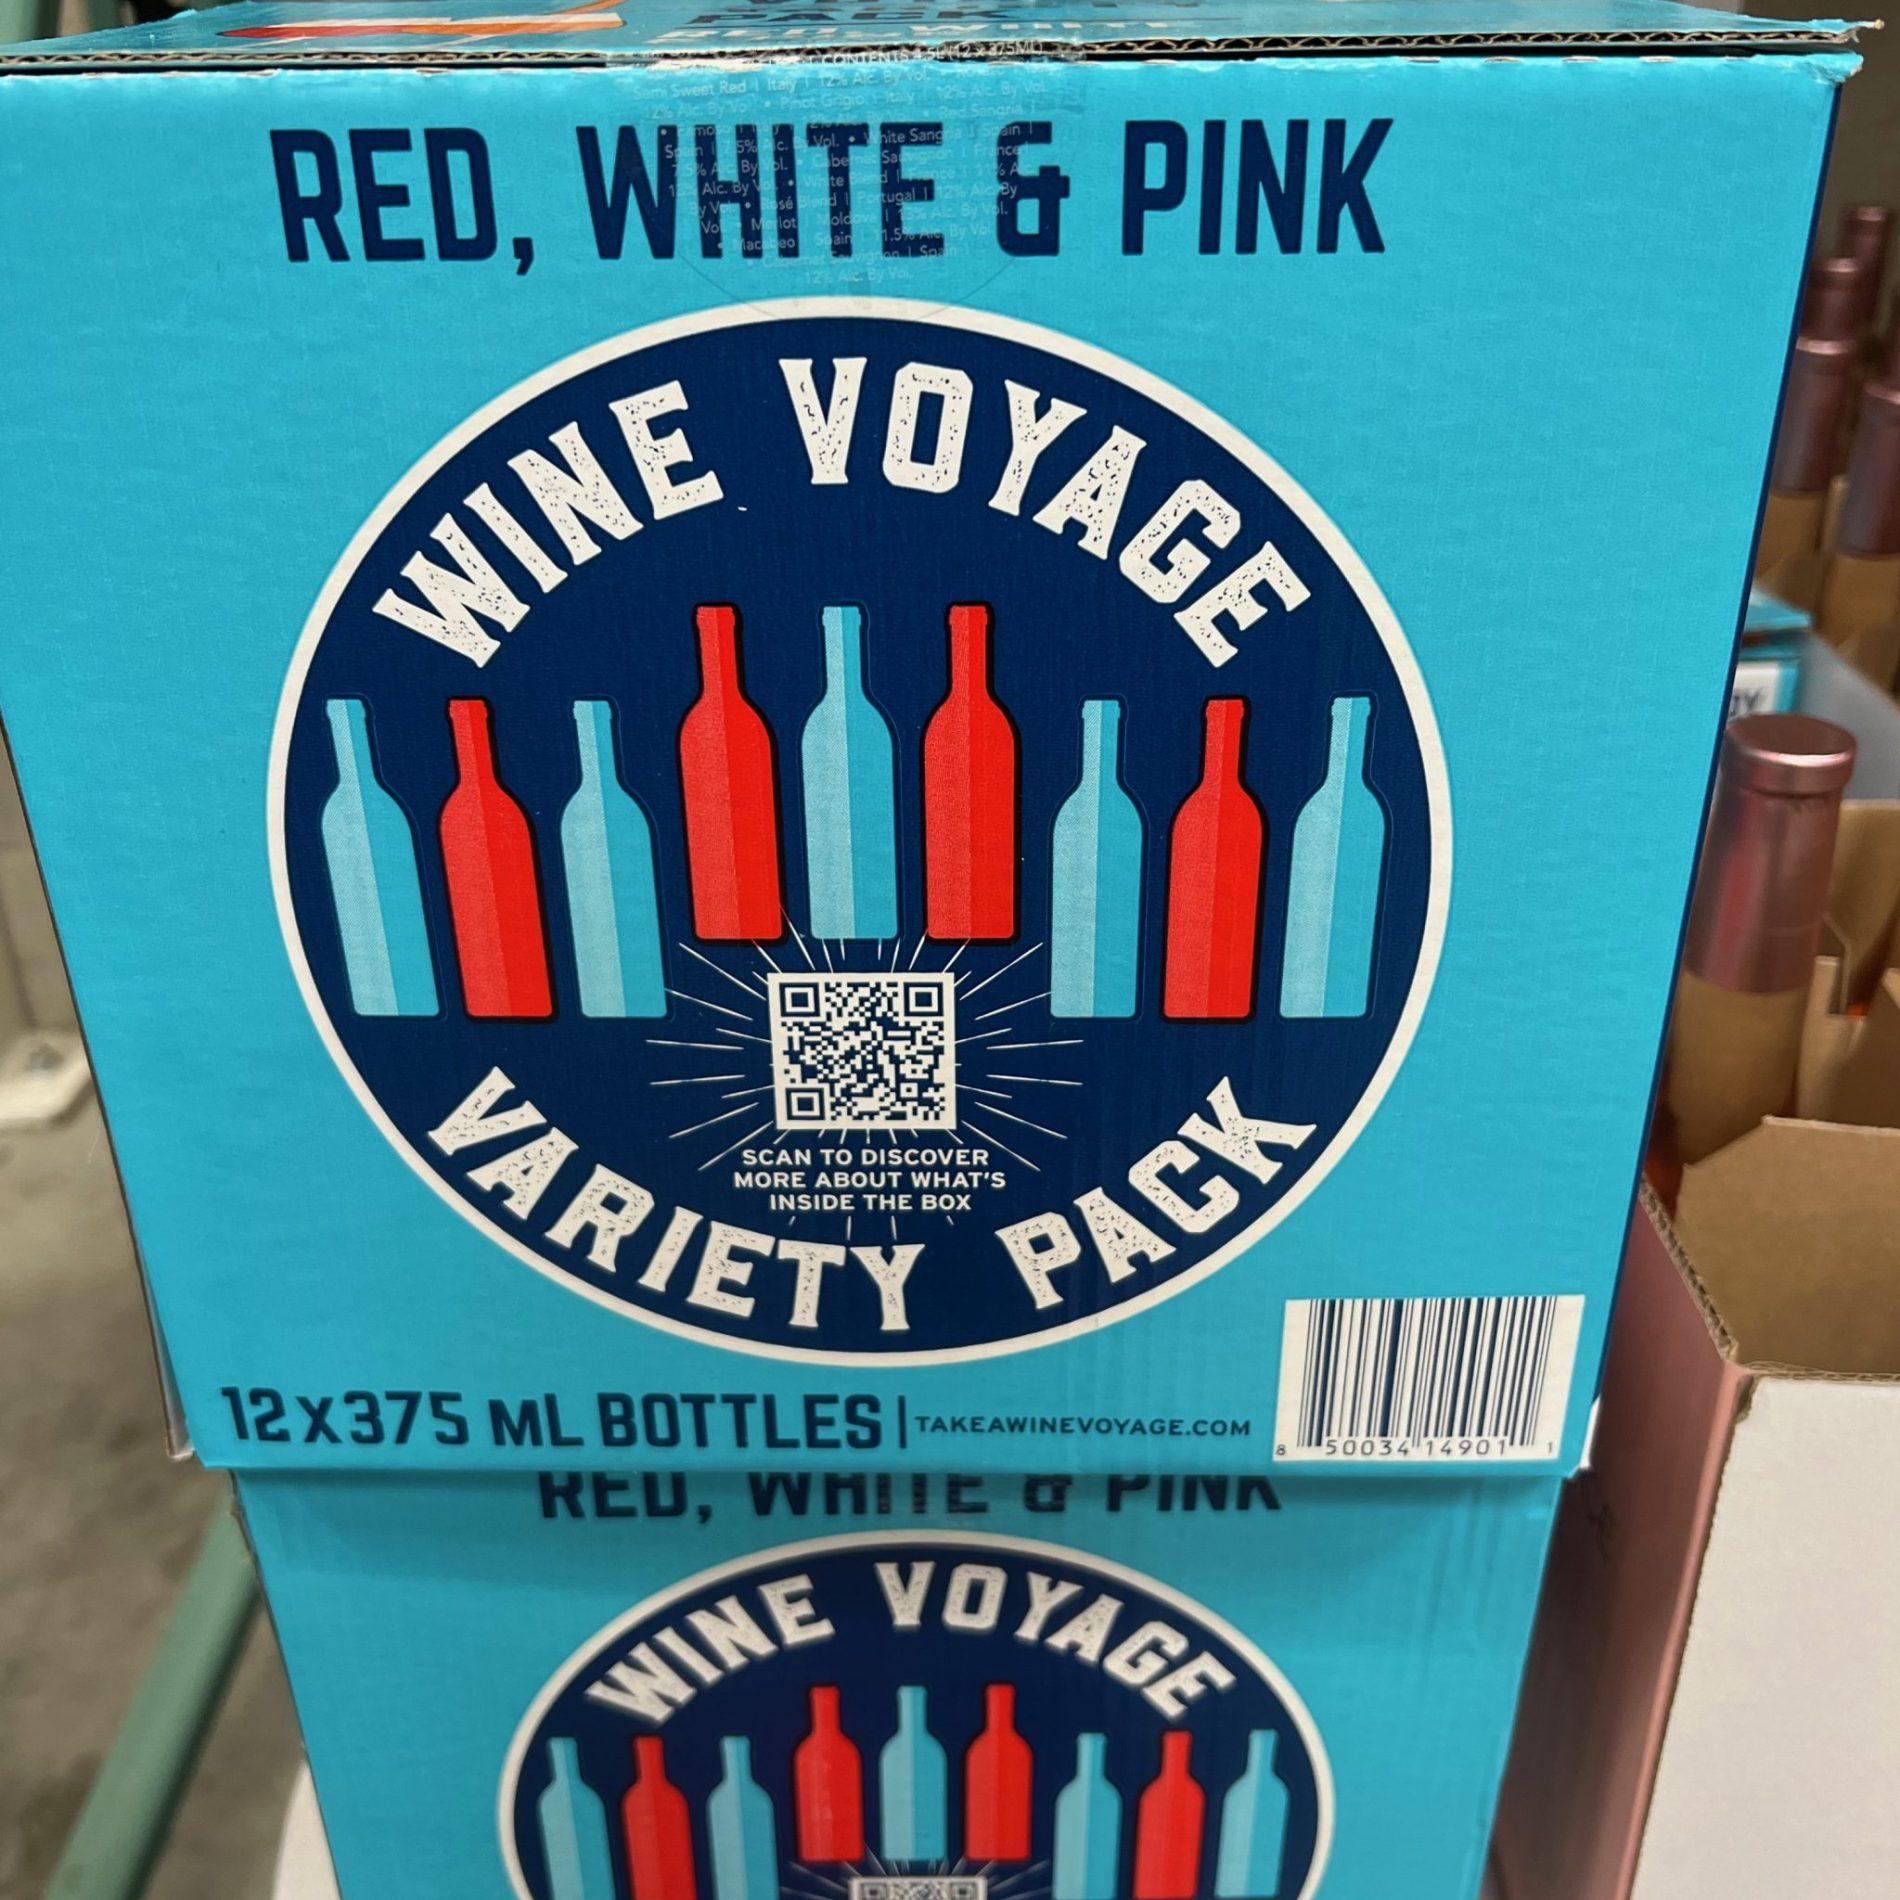 Costco Wine Voyages Red, White & Pink Advent Calendar